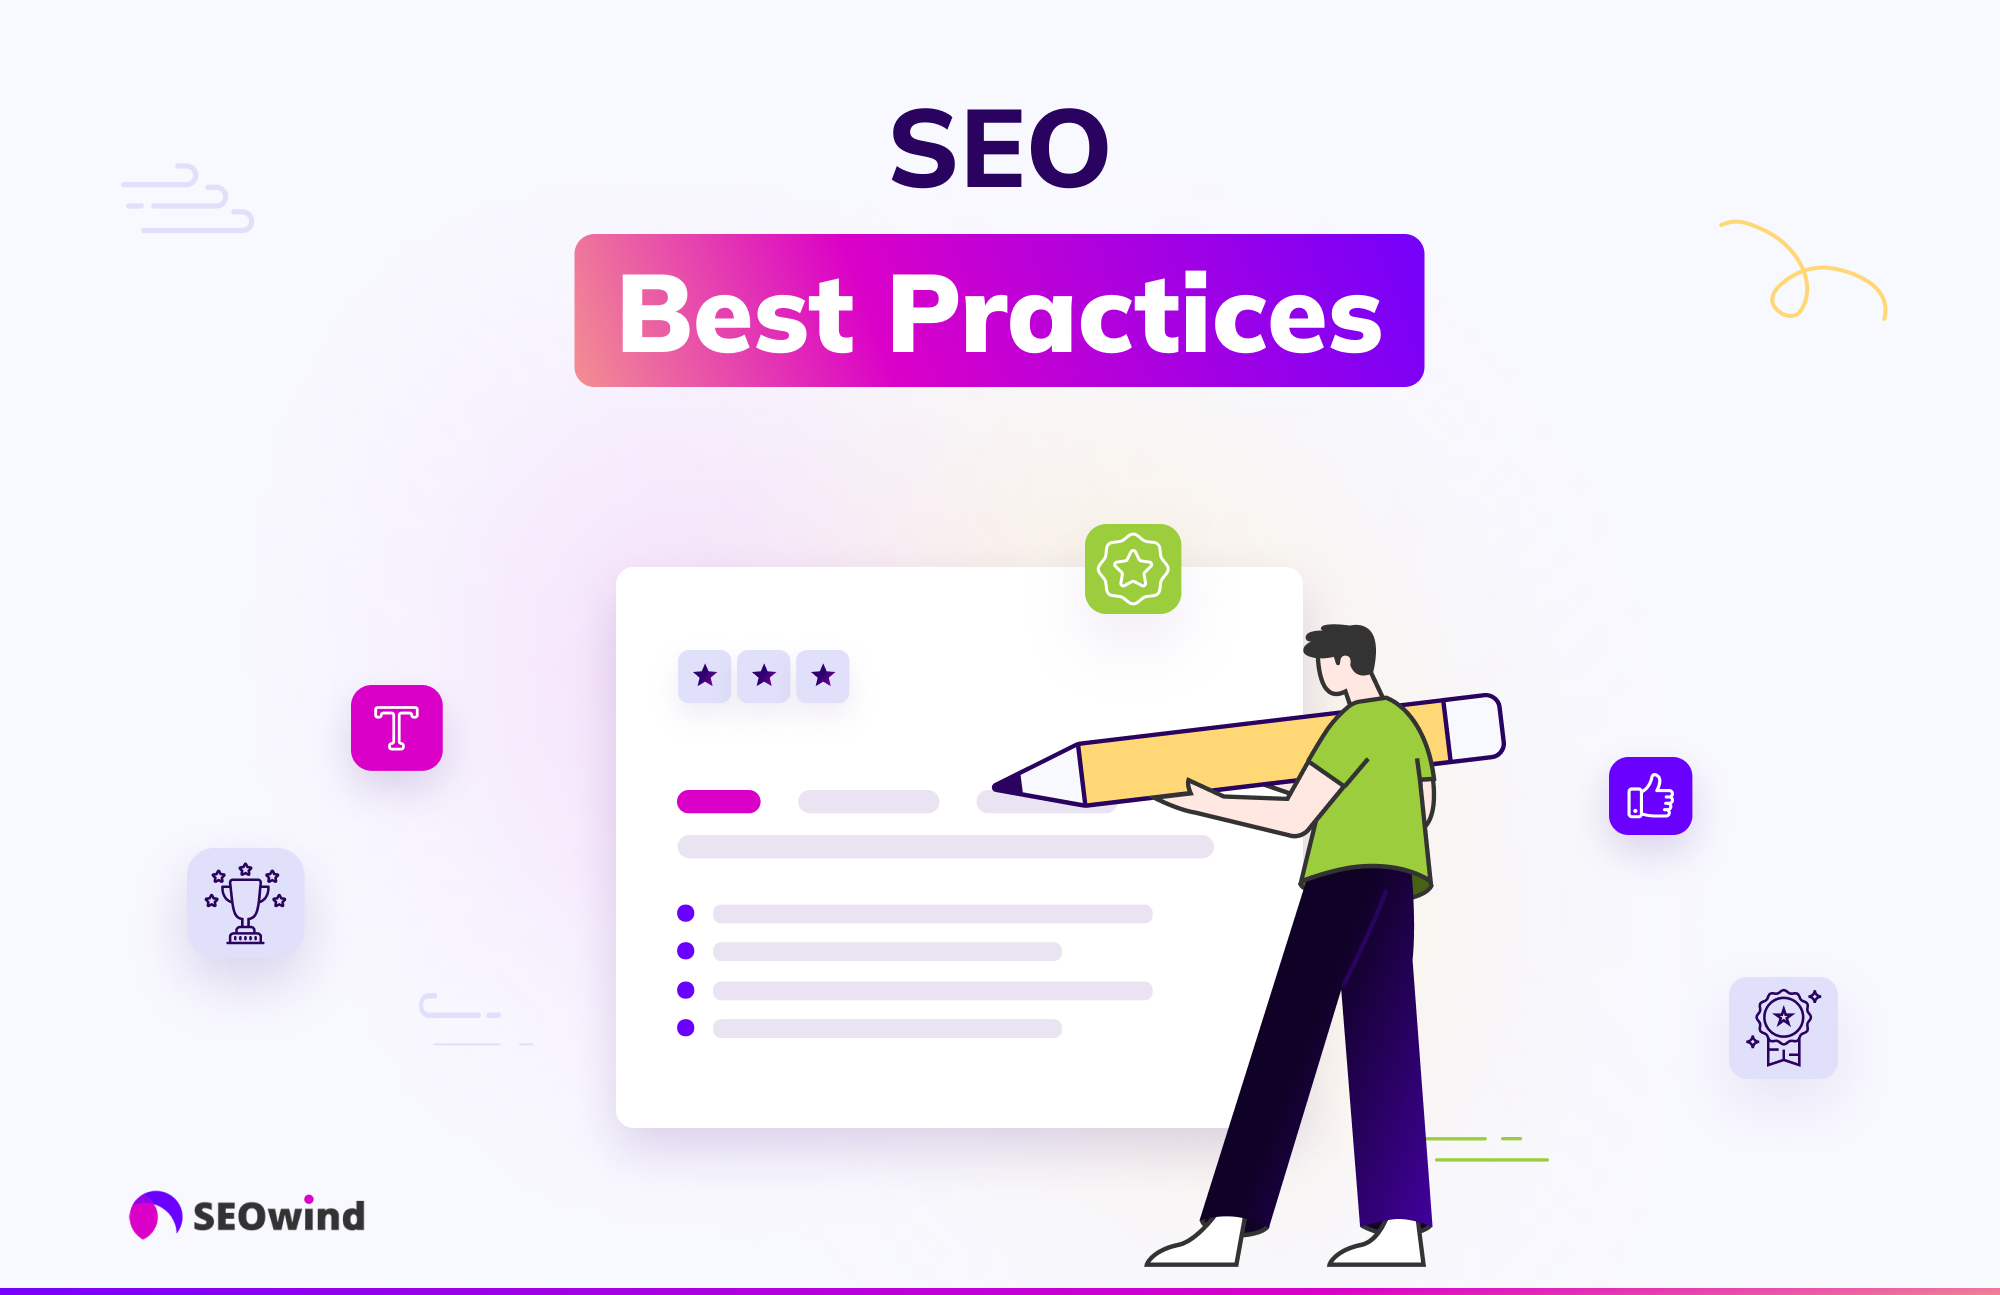 20 Seo Best Practices To Boost Traffic Seowind Tested 6182